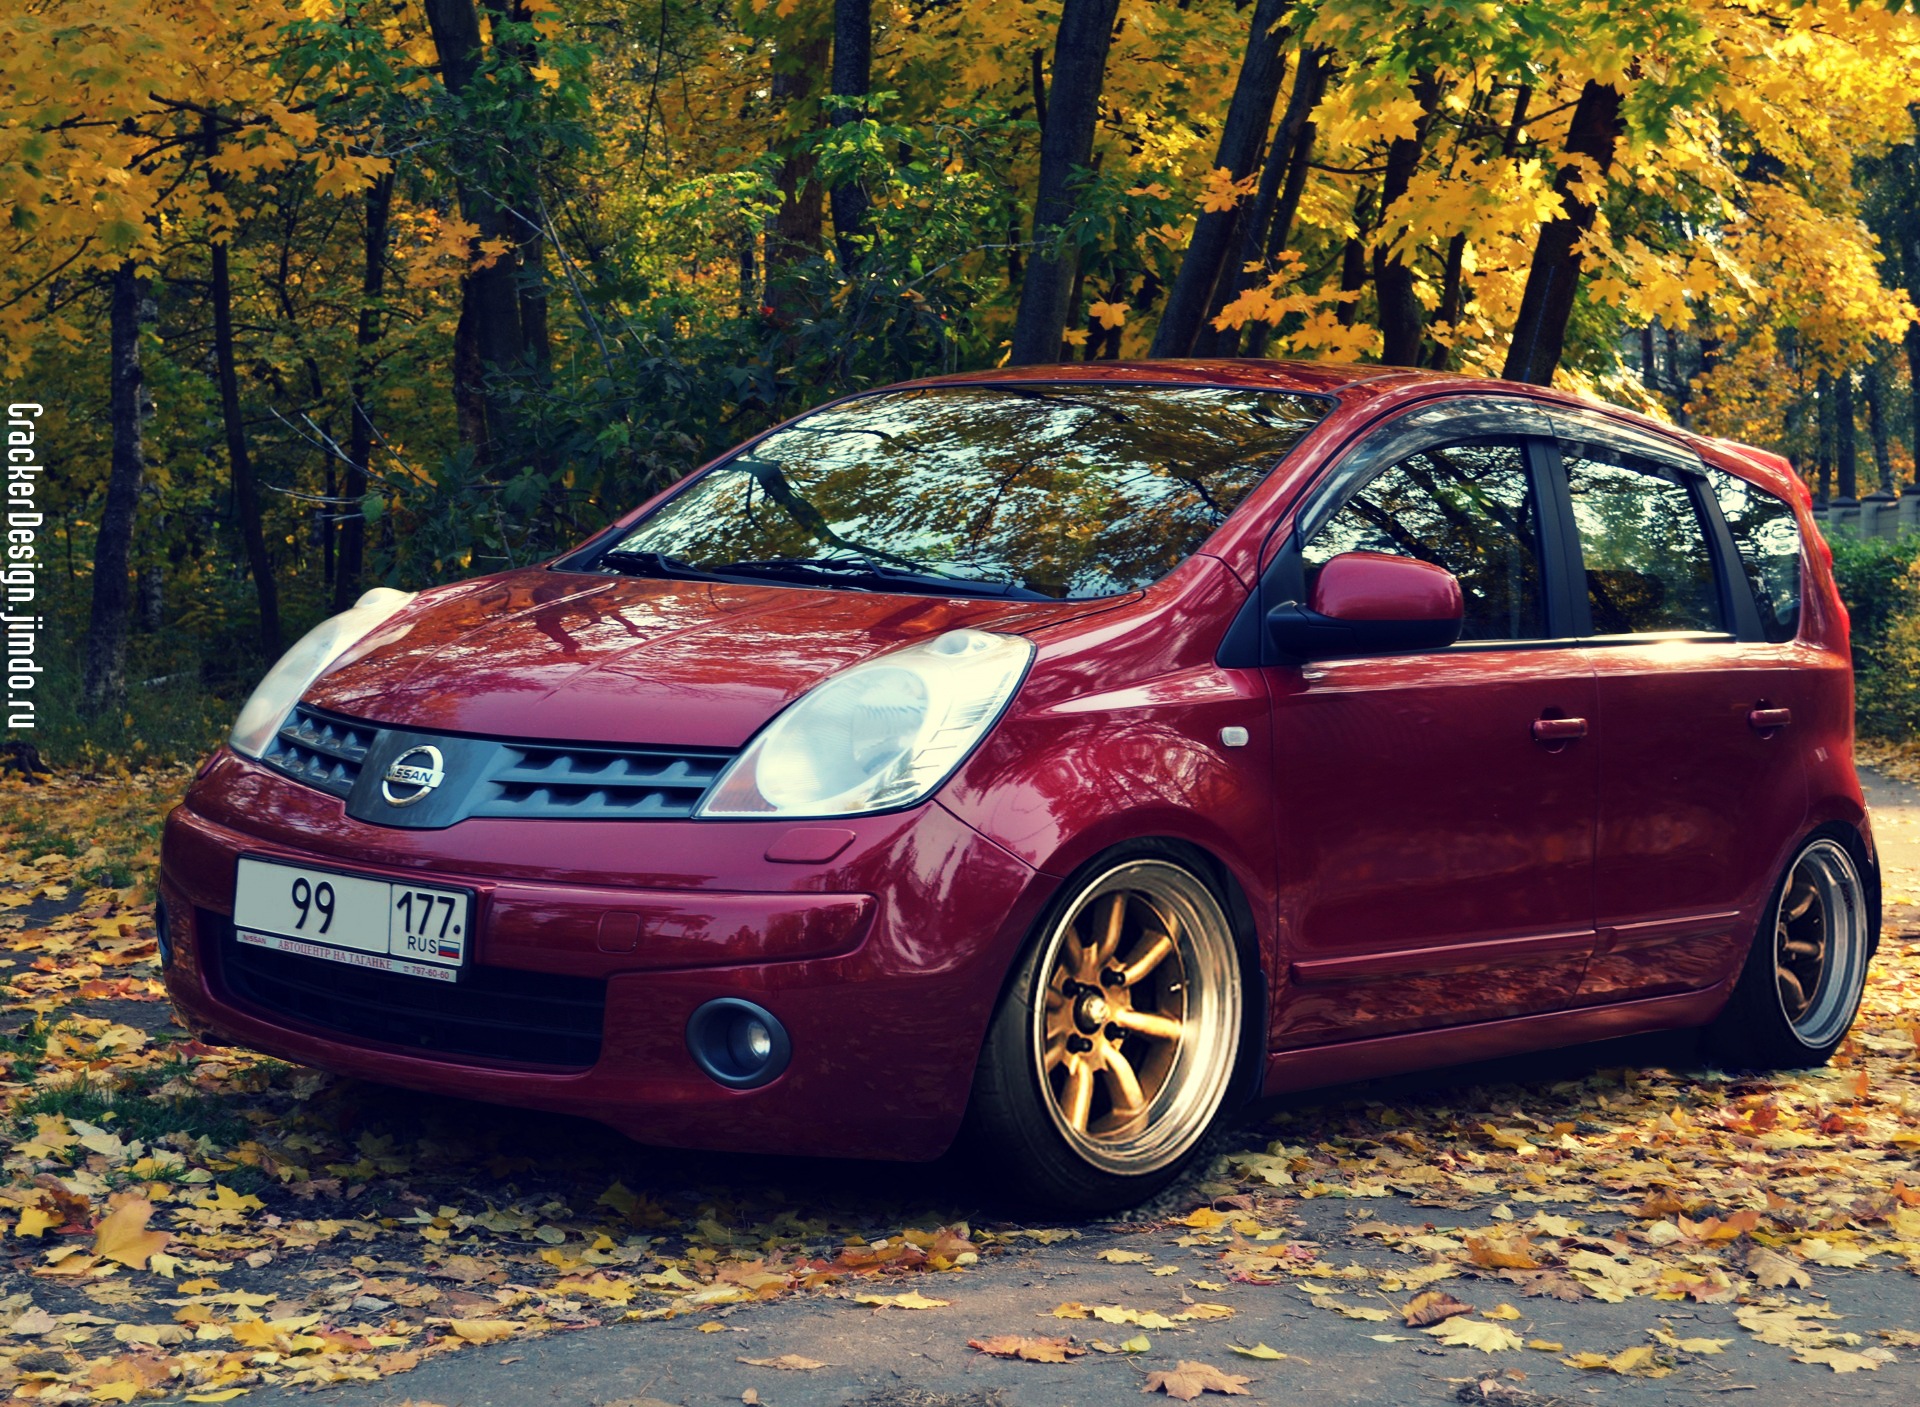 Nissan note e11 1.4. Nissan Note 2008 Tuning. Ниссан ноут е11. Nissan Note e11 stance. Nissan Note 2011 1.6.